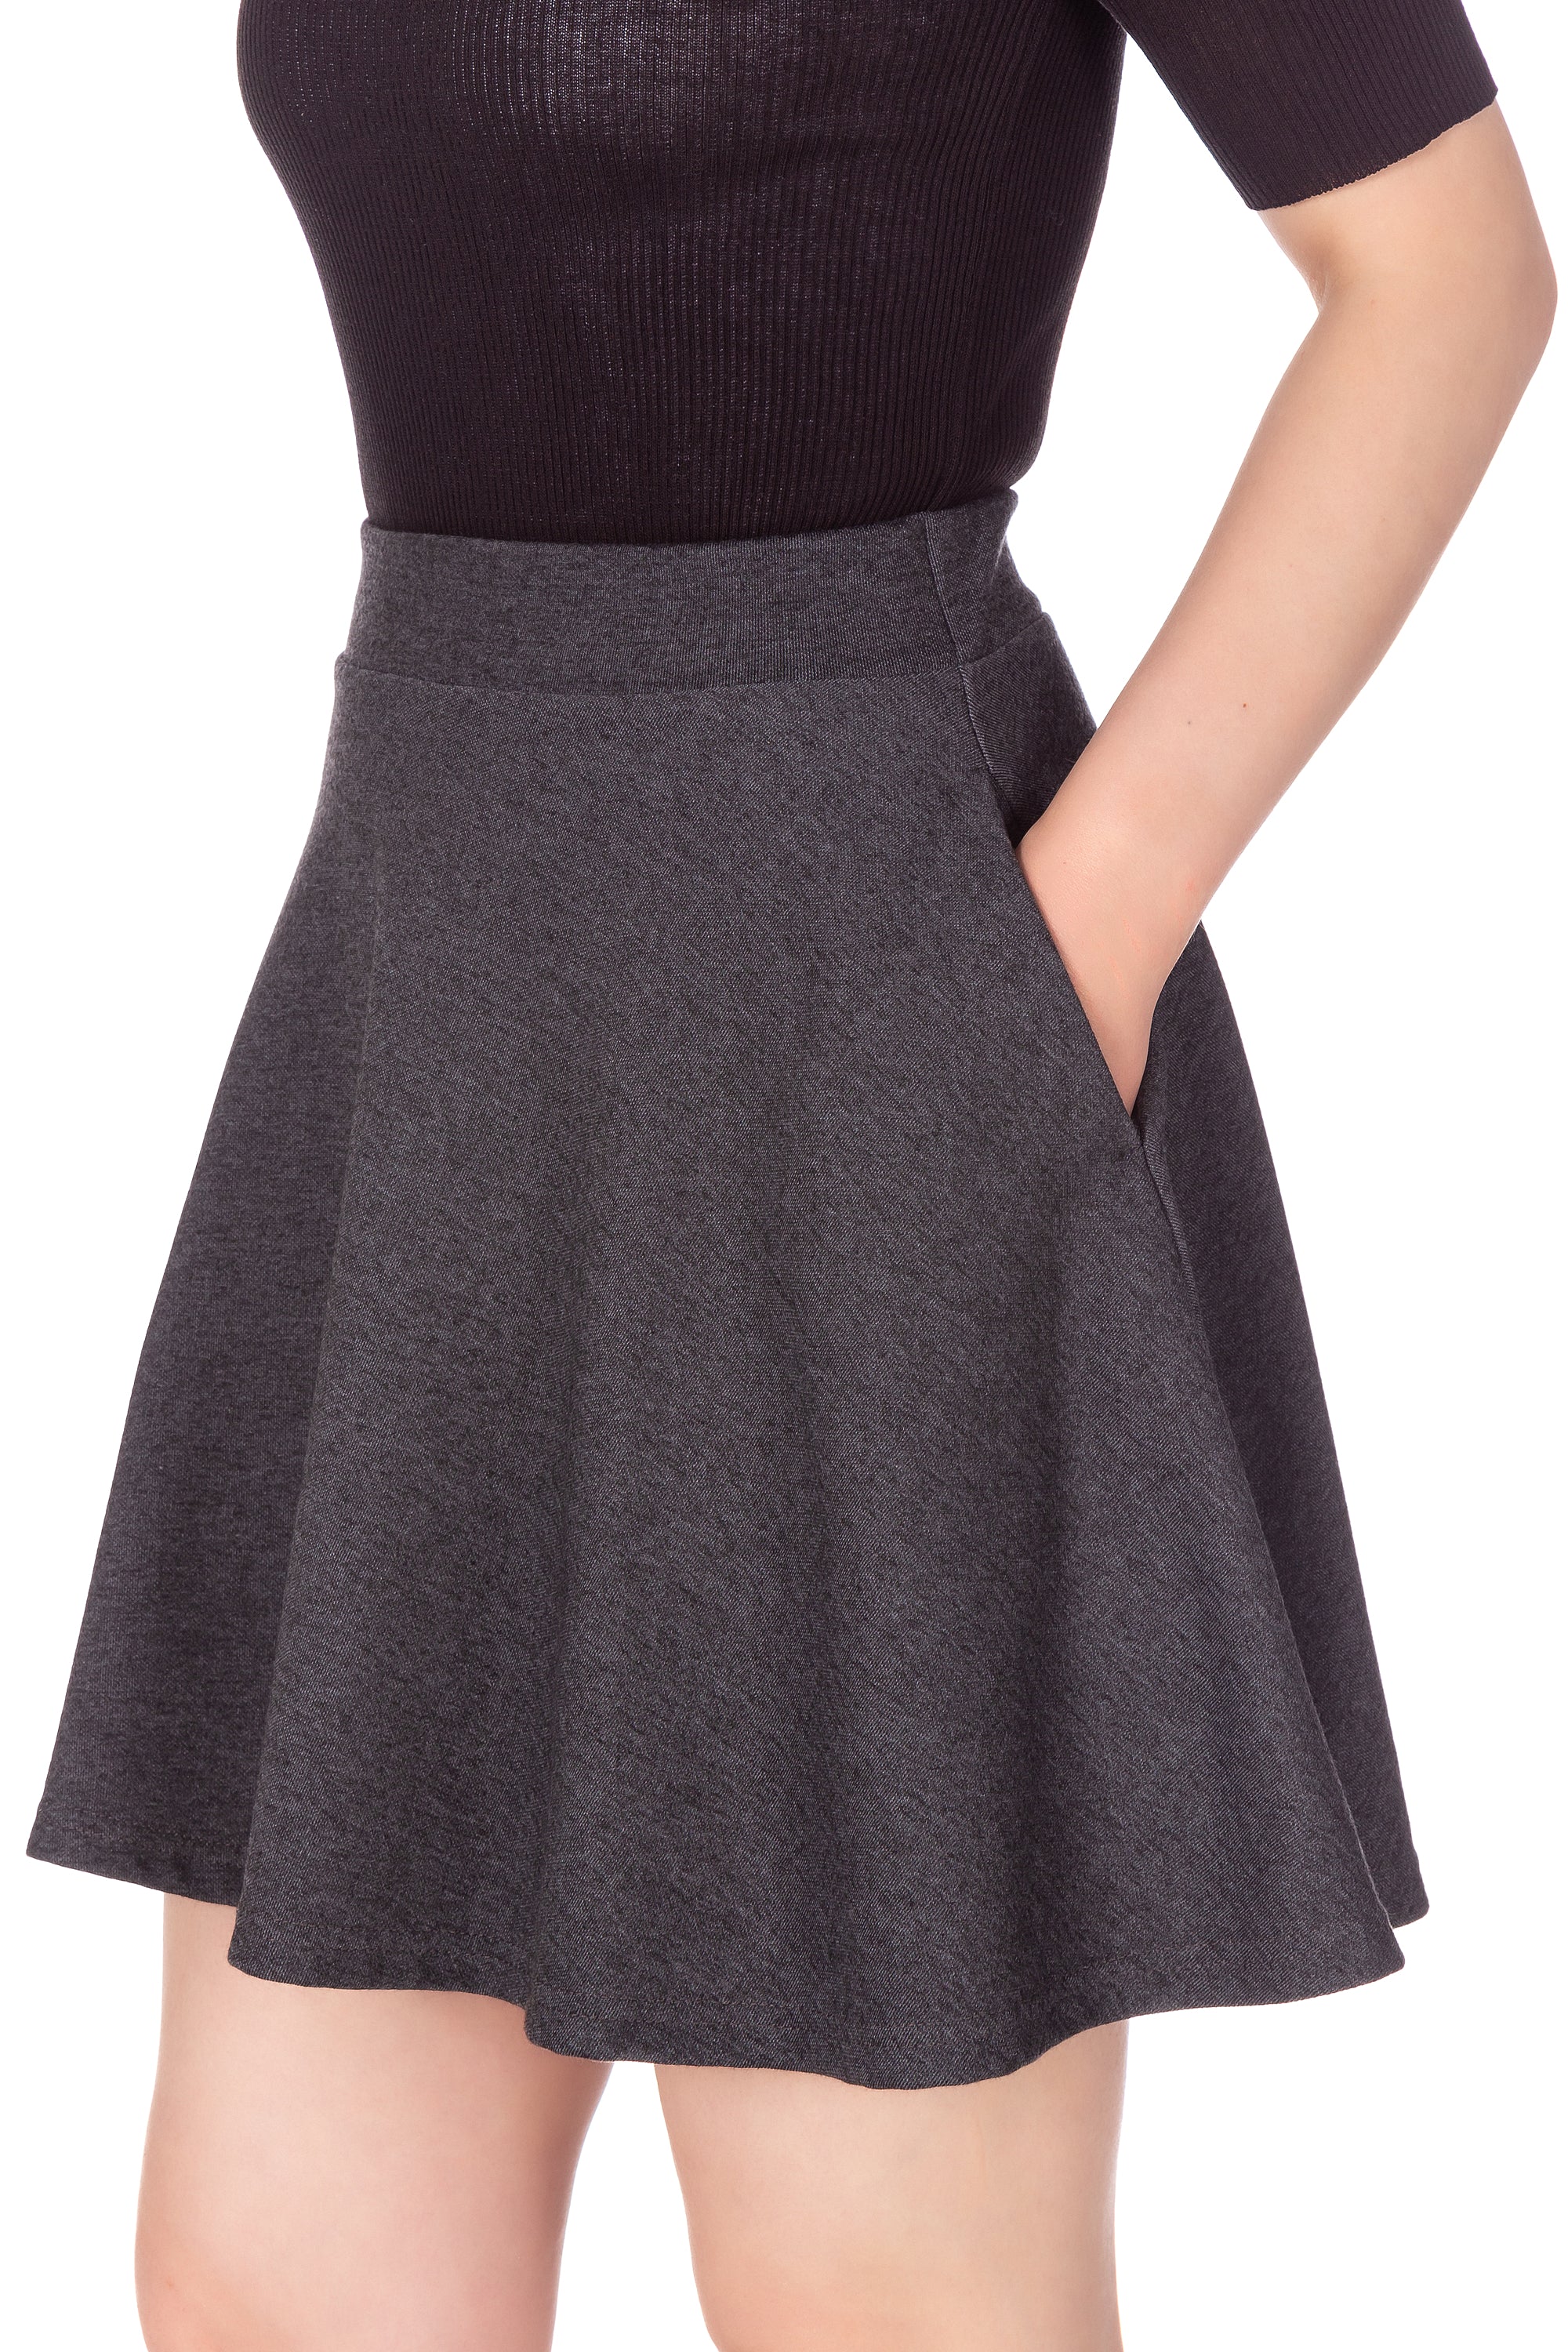 Sinono Basic Stretchy Solid Flared Casual Mini Pleated Skater Skirt  (X-Small, Black) at Amazon Women's Clothing store